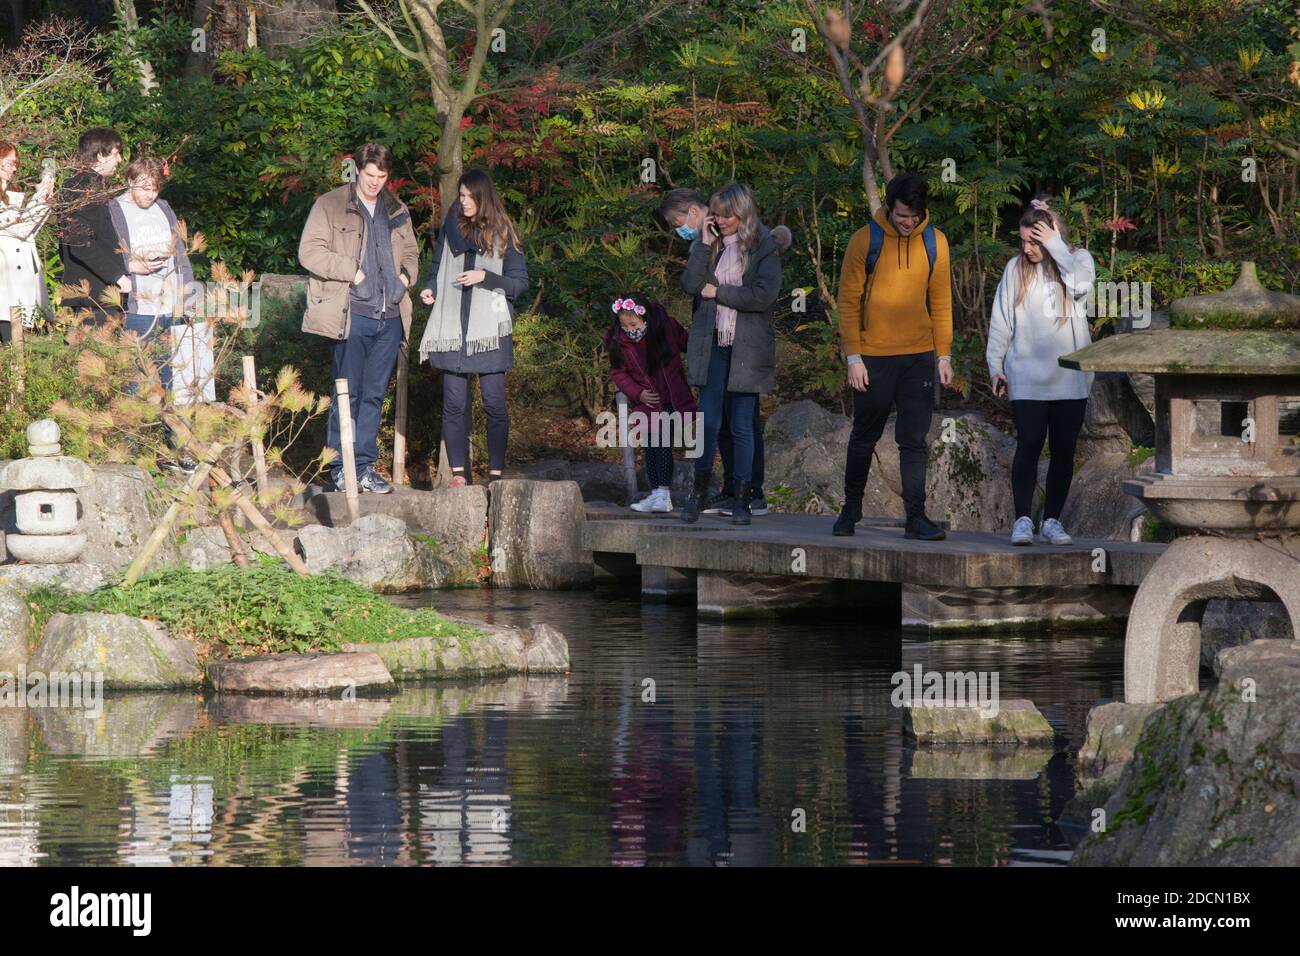 UK Weather, London, 22 November 2020: On a sunny Sunday in London people flock to Holland Park, where queues formed in the Kyoto Garden and visitors photographed squirrels and peacocks.Very few people wore face masks but most made an attempt at social distancing. Announcements are planned tomorrow (Monday) about a new tier system of covid restrictions to be implemented once the current lockdown finishes on 2 December. Anna Watson/Alamy Live News Stock Photo